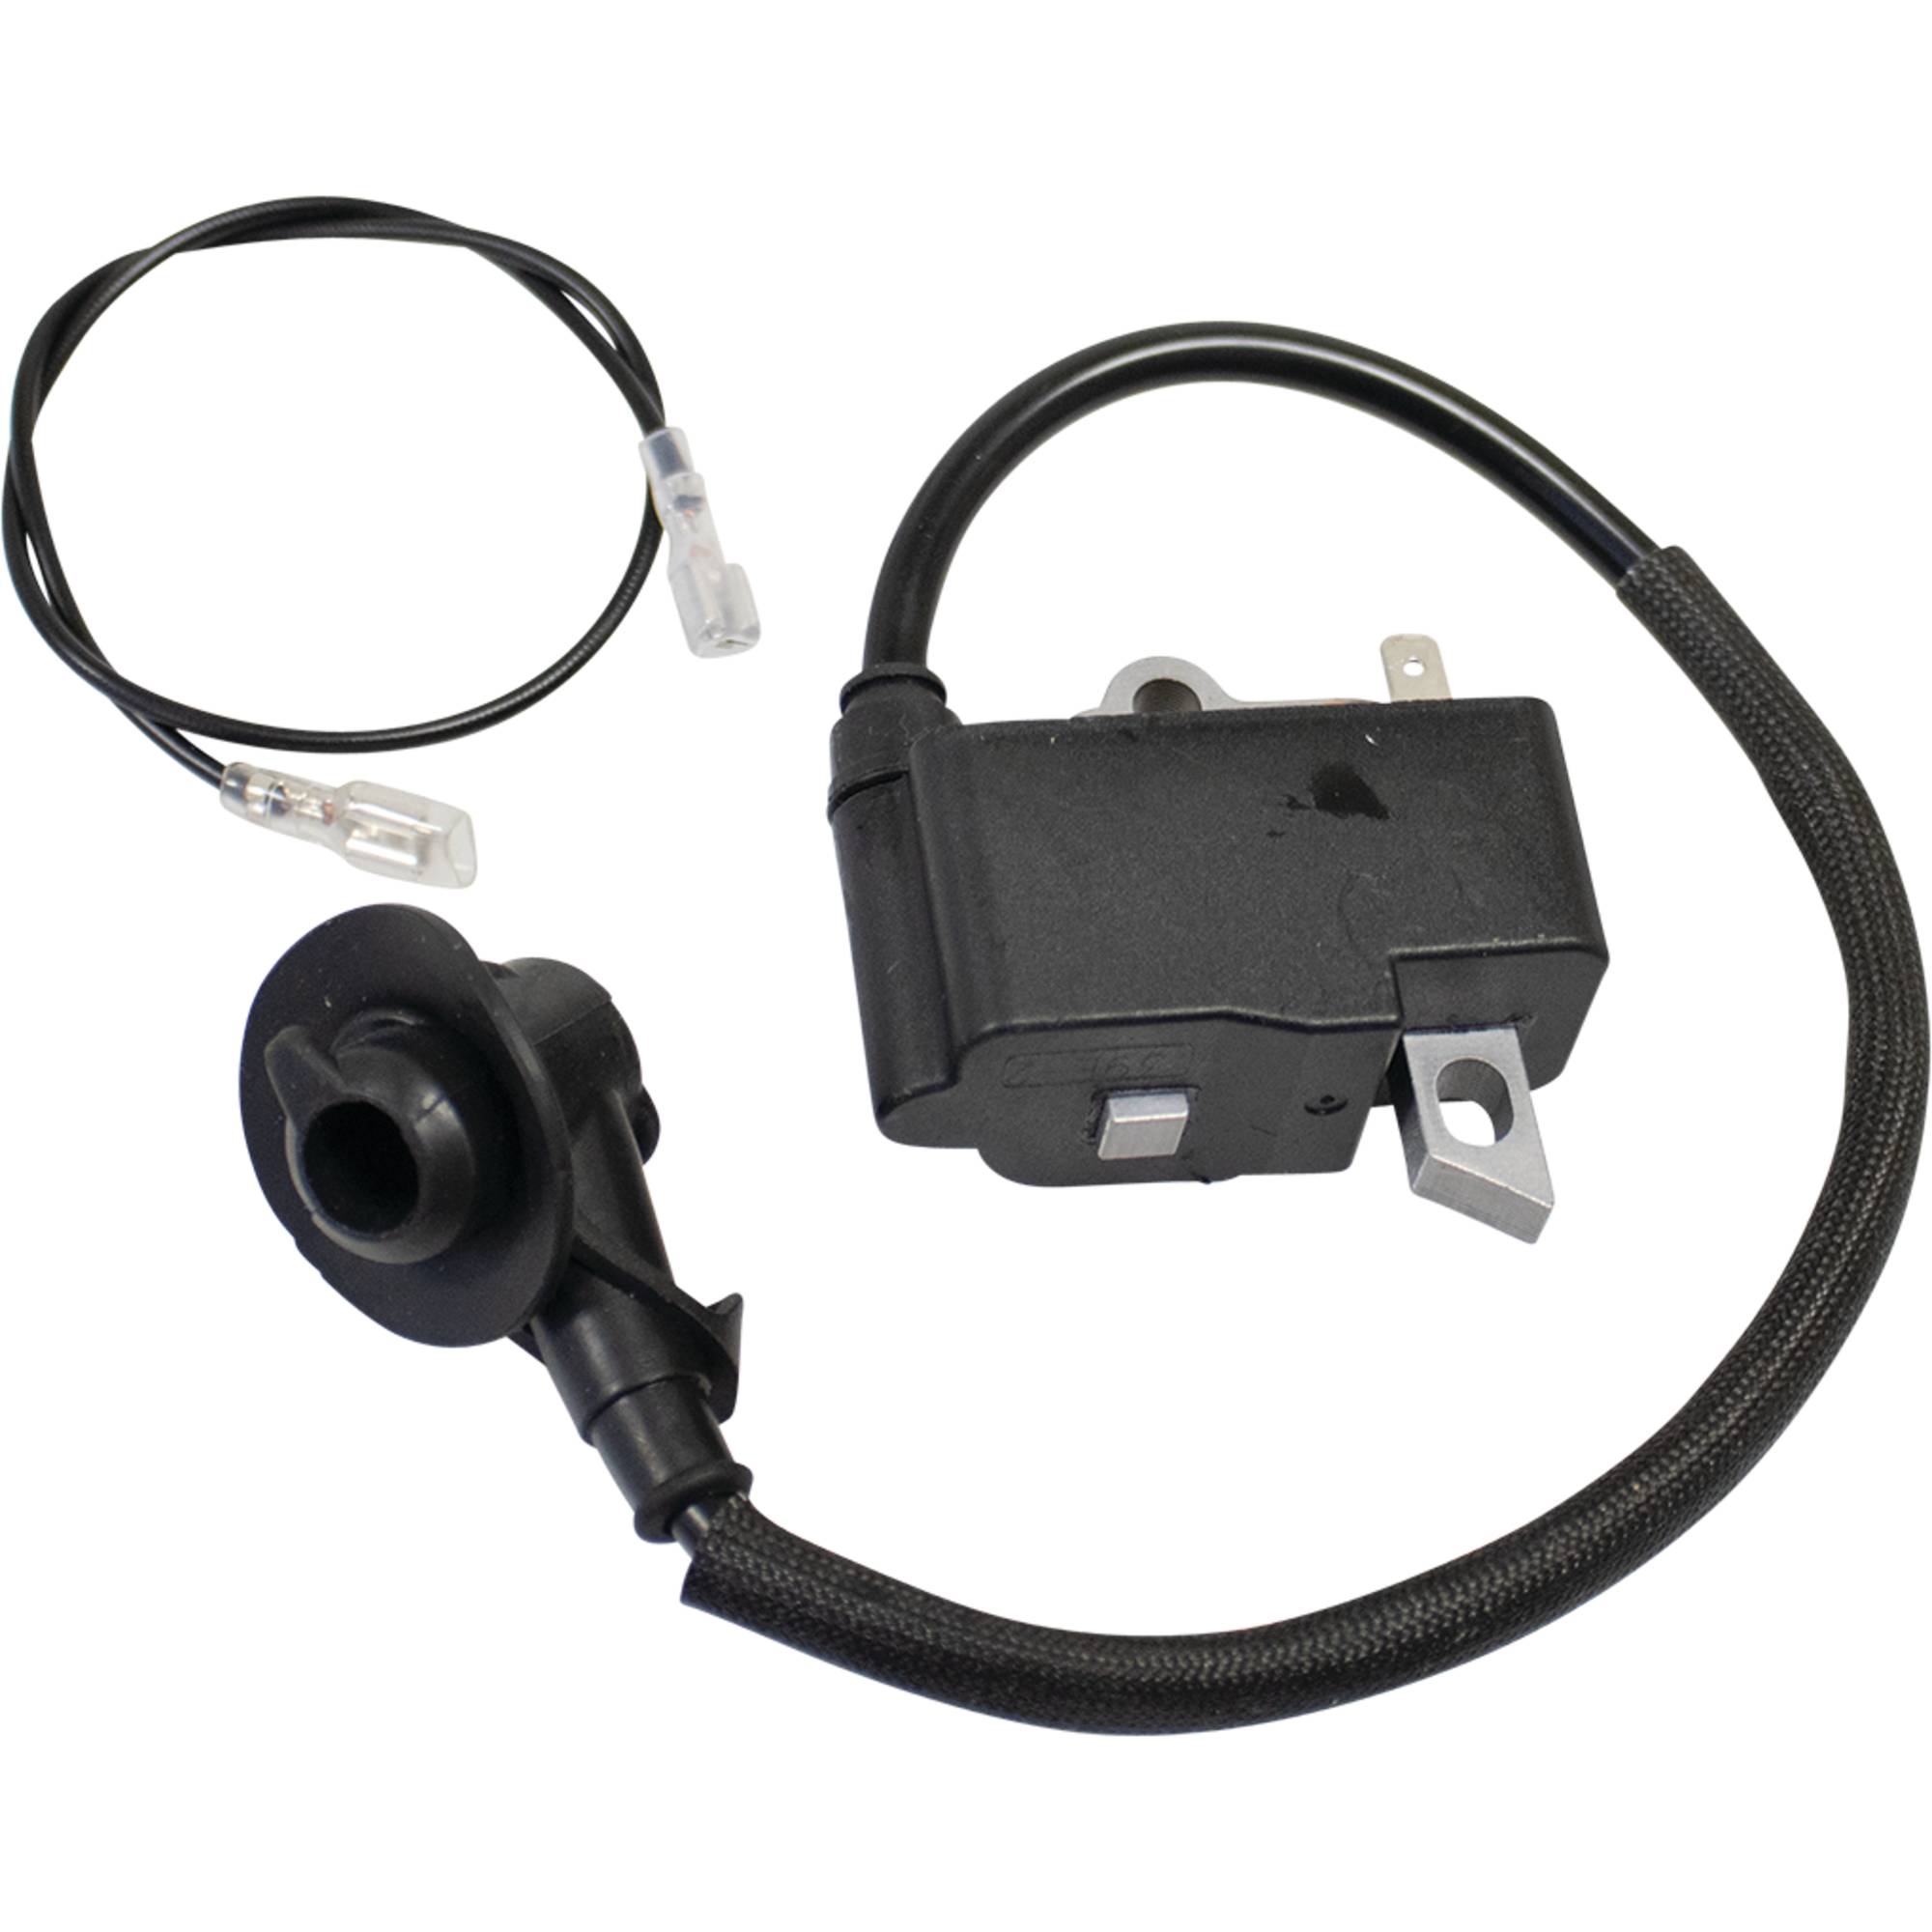 Stens 600-986 Ignition Coil for Stihl 4238 400 1307